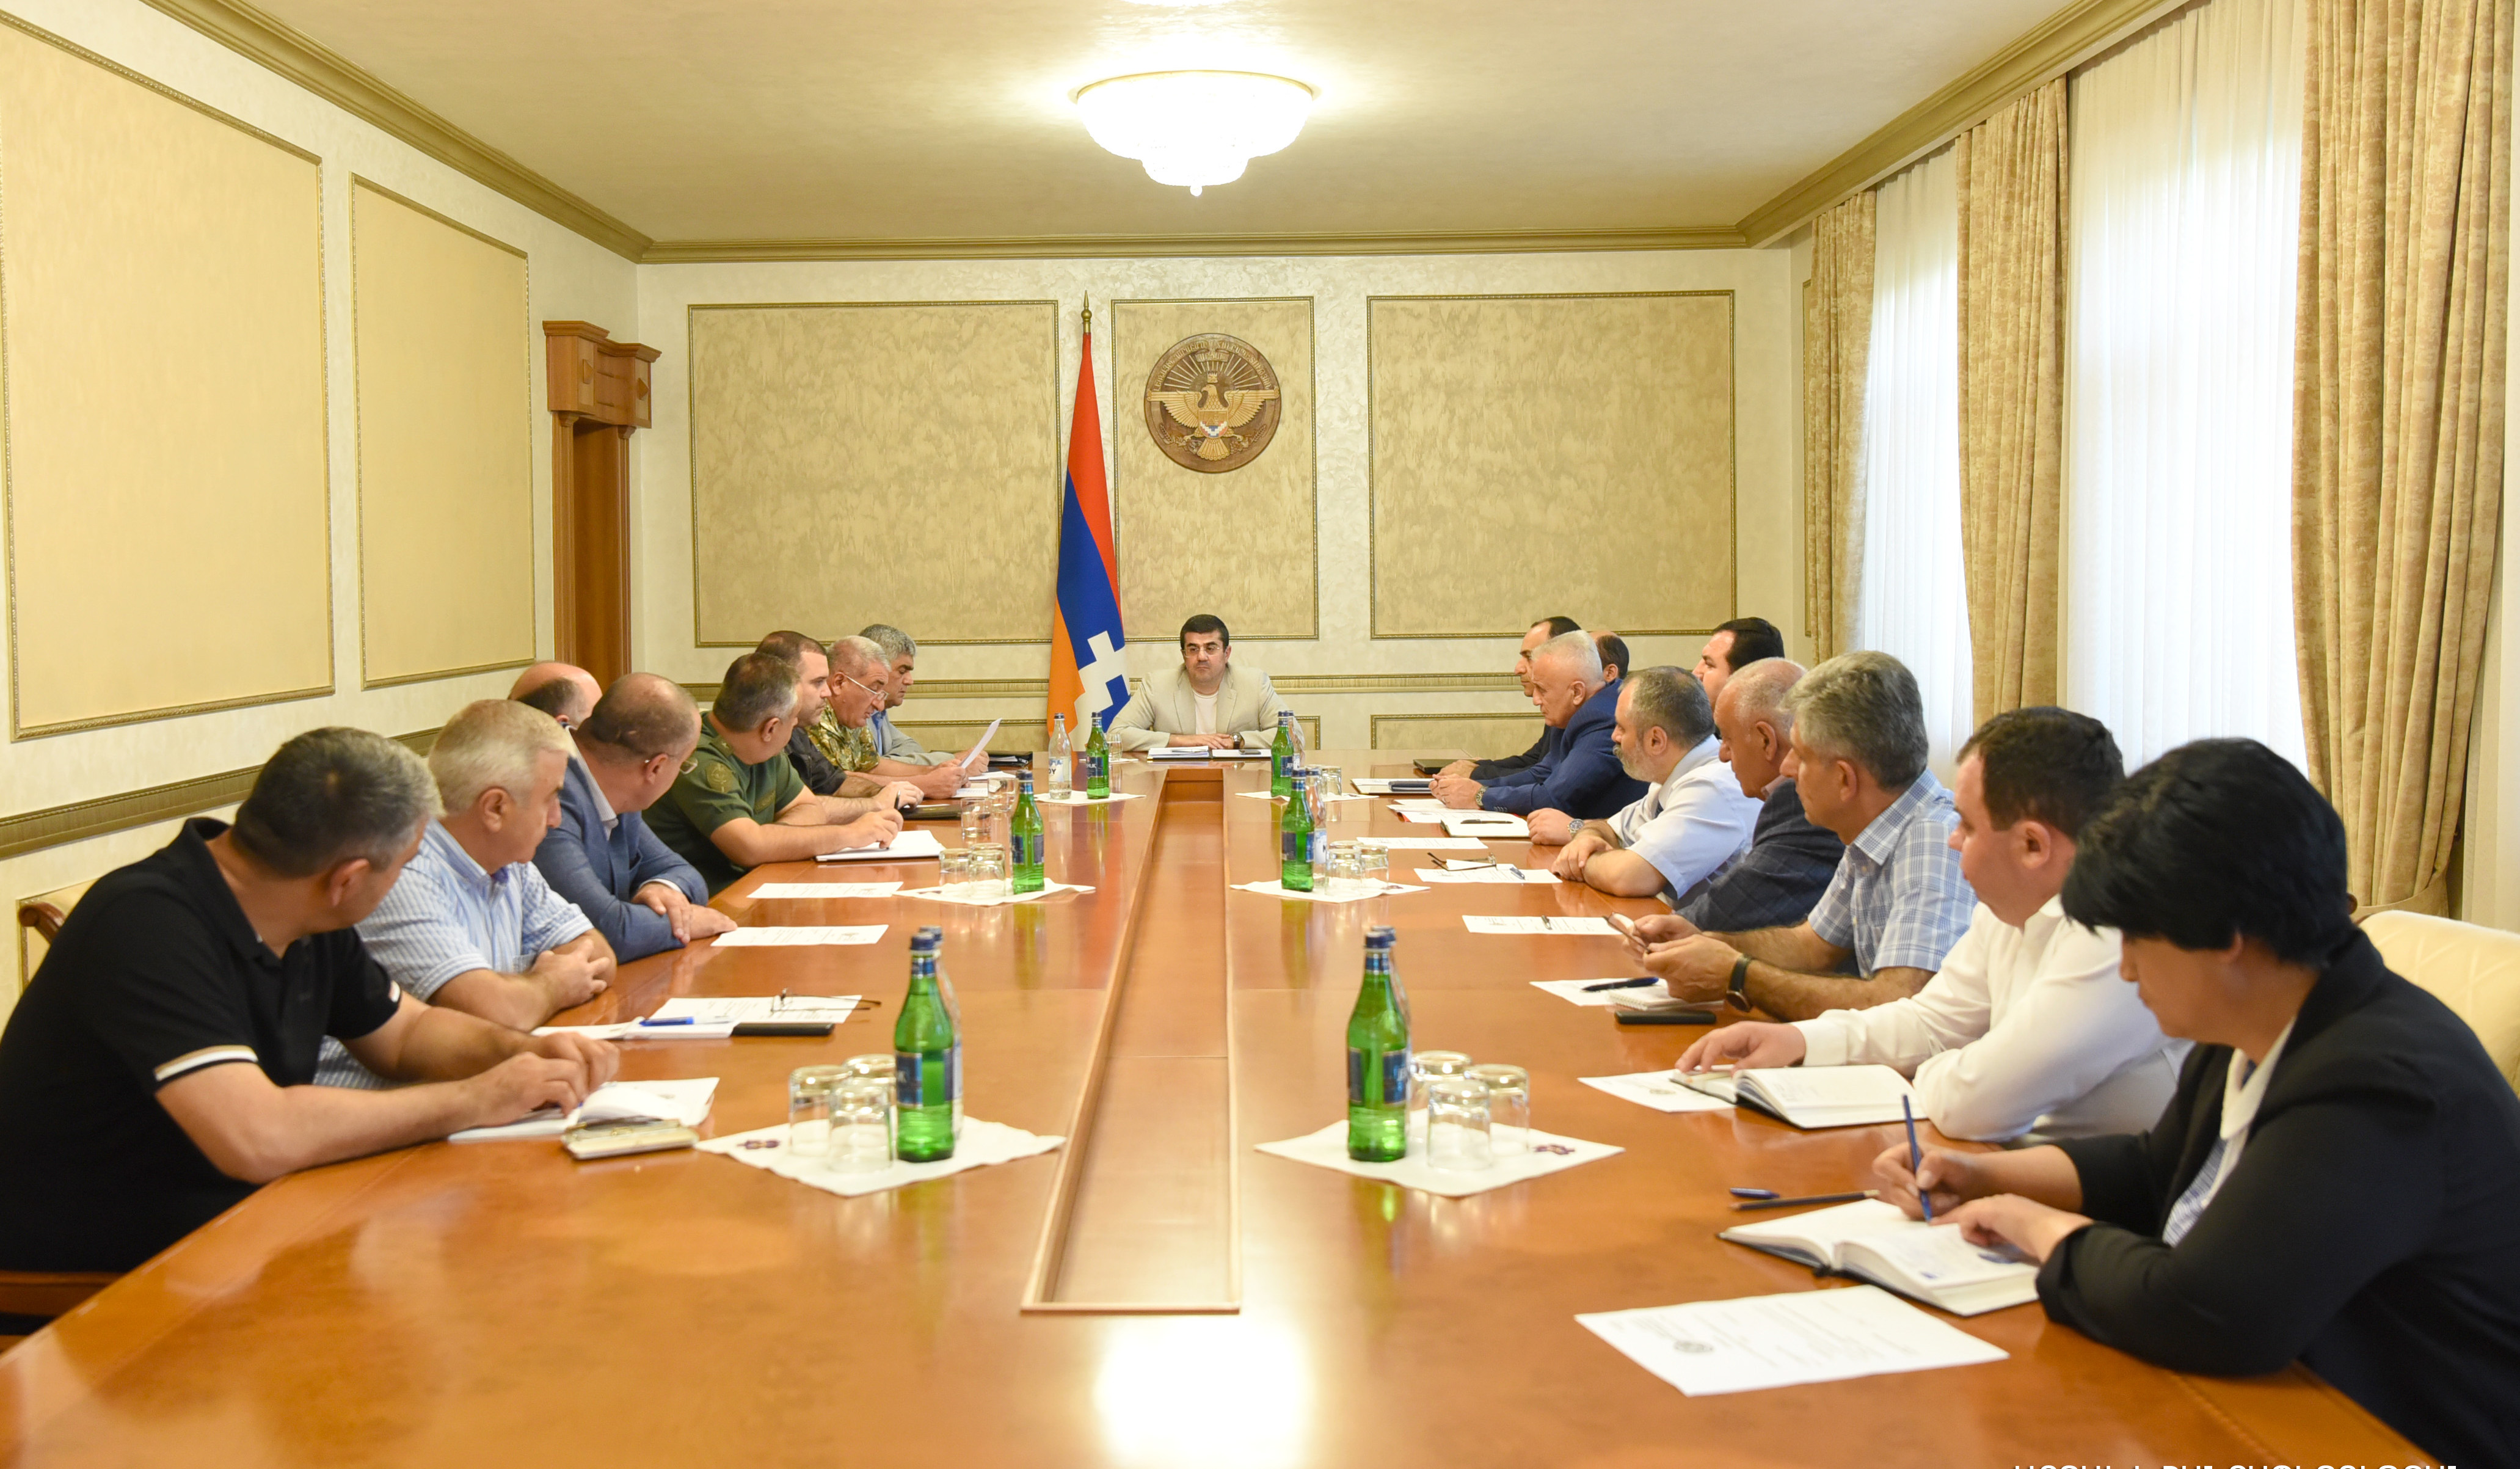 Tension continues to persist in number of sections of line of contact: President of Artsakh called extended session of Security Council